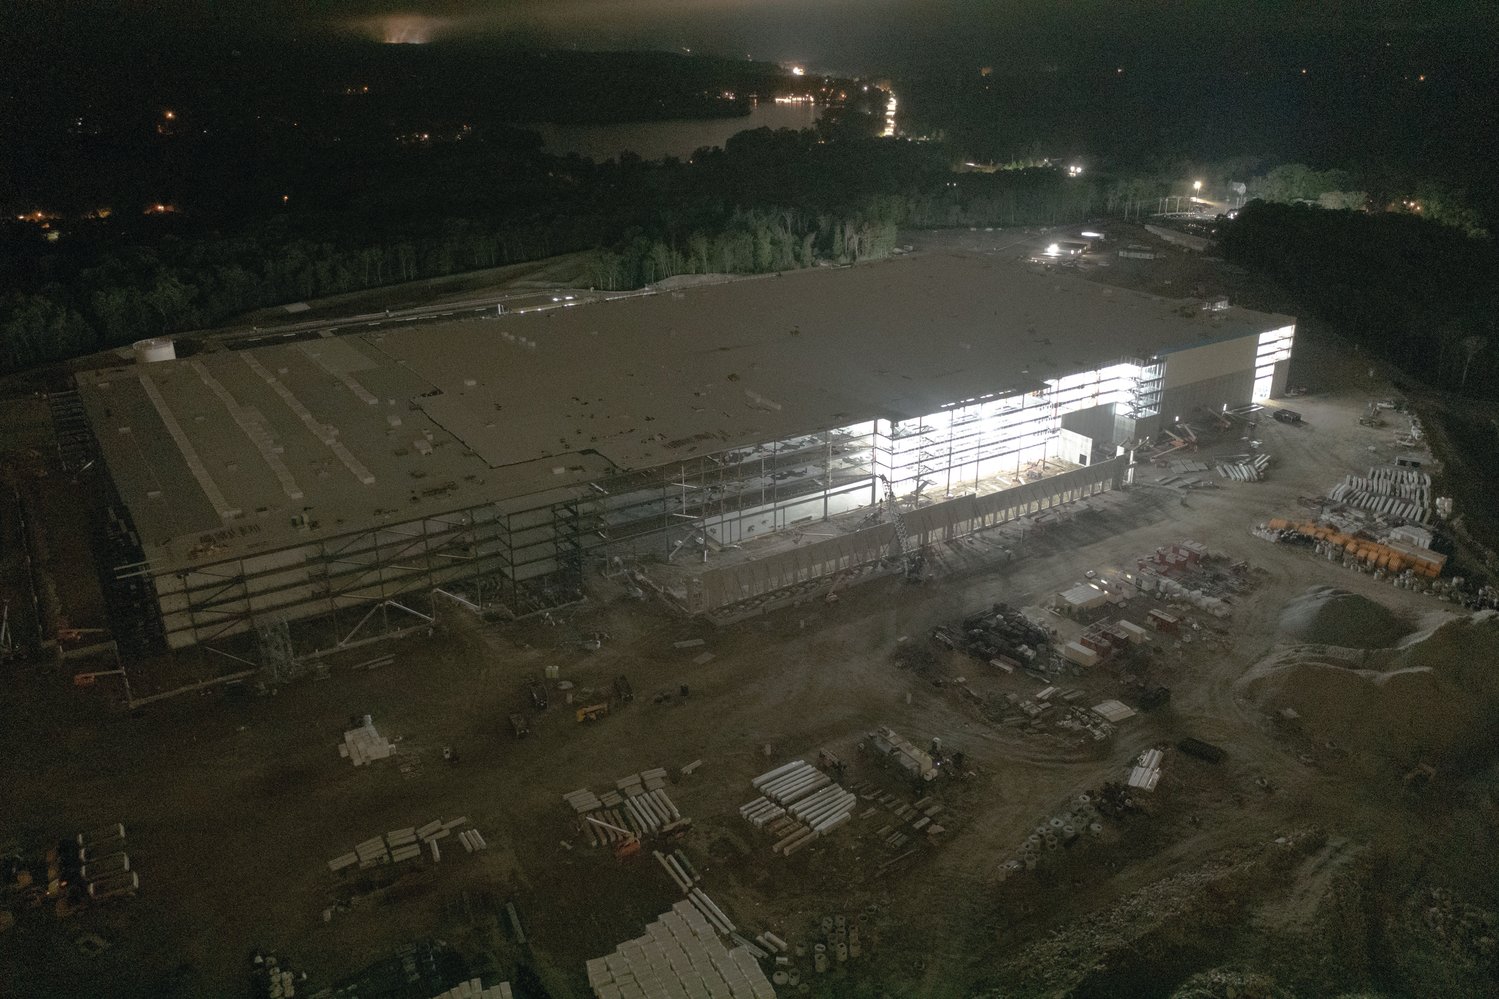 BLUE AND WHITE: These images of the Amazon construction site in Johnston, at and following sunset, were captured by drones piloted by Trevor Bryan, an FAA Licensed and insured drone pilot, the owner and operator of New England Aerial Services, on Sept. 21. For more information on the Warwick-based company, visit their Facebook page at www.facebook.com/newenglandaerialservices. 